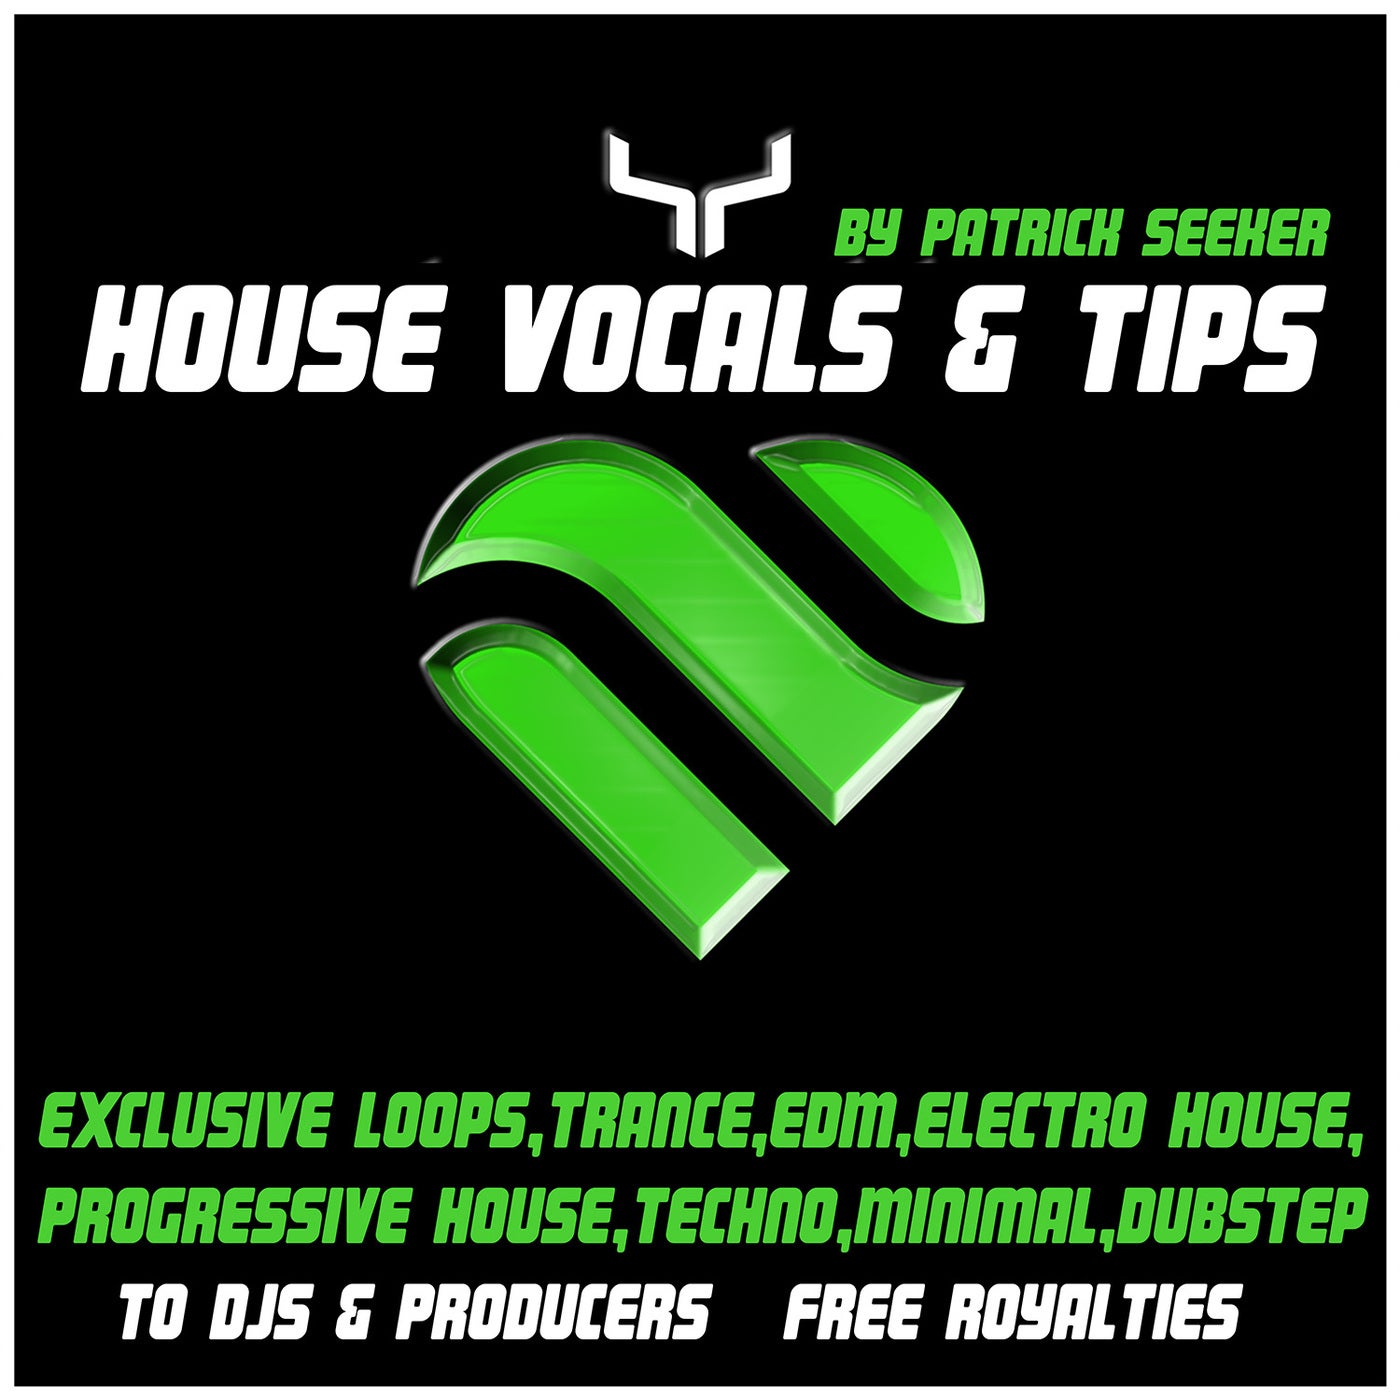 House Vocals & Tips By Patrick Seeker